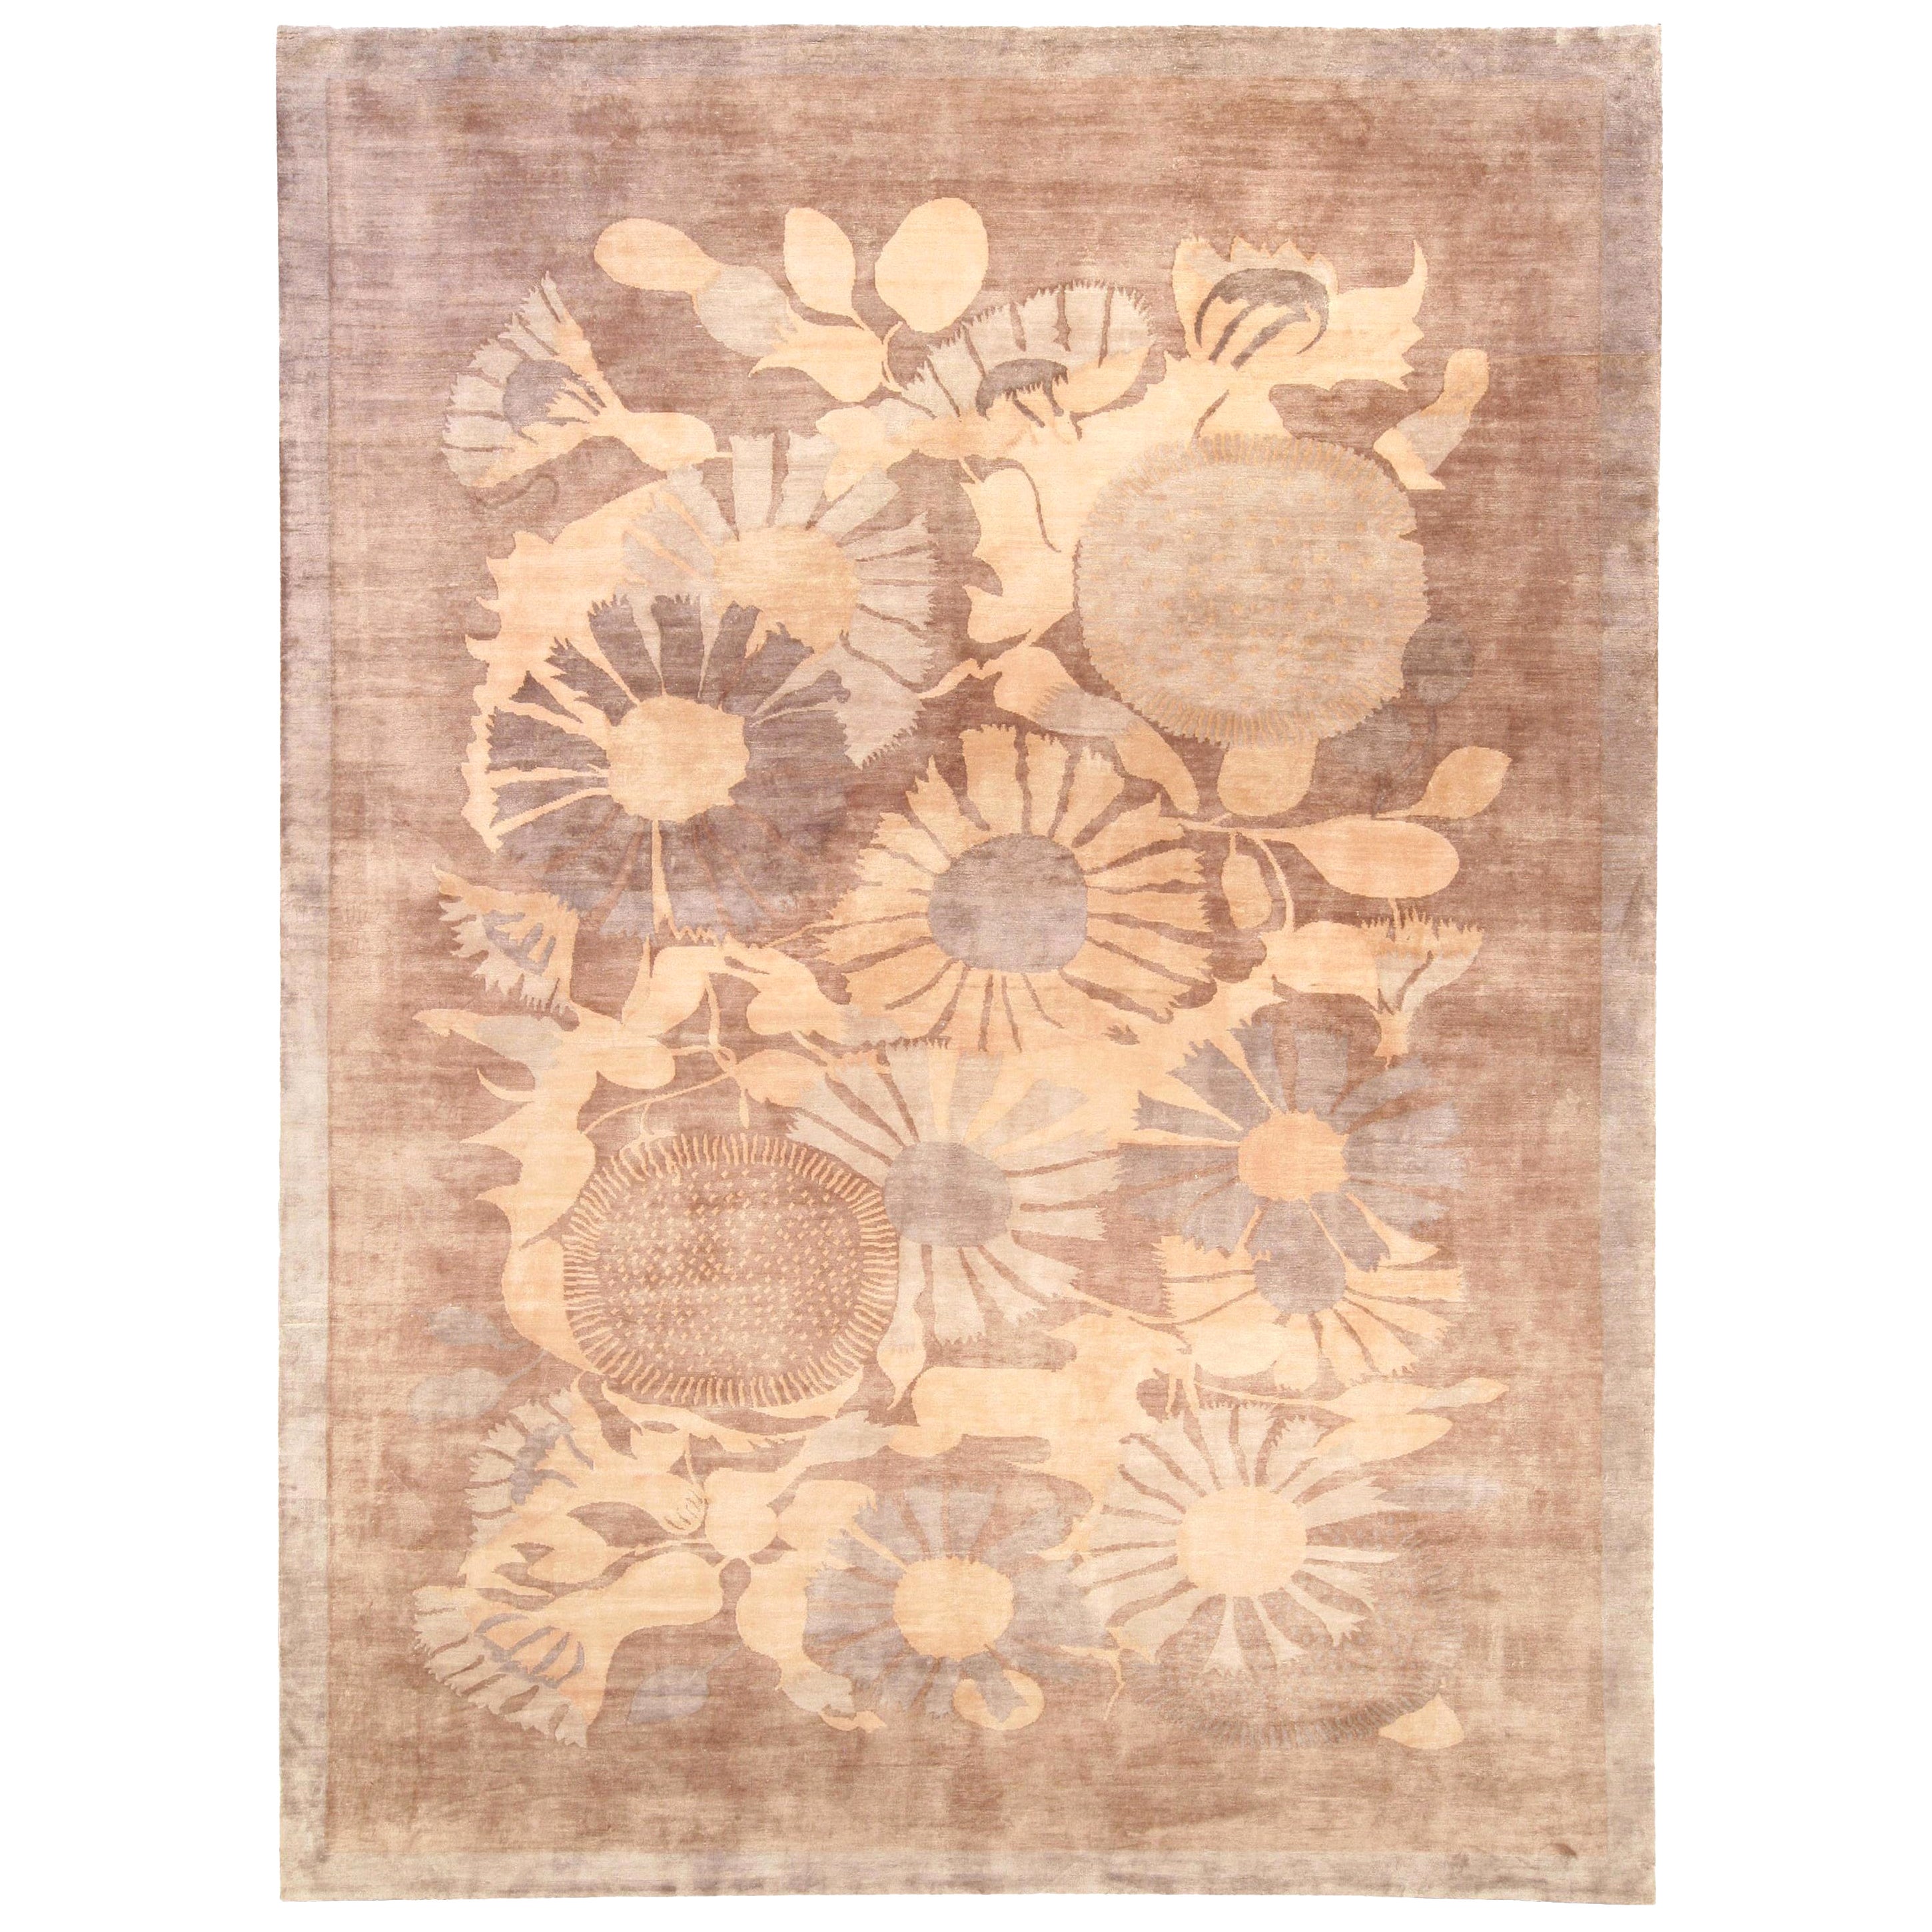 Contemporary Floral Lilly Design Hand Knotted Silk Rug by Doris Leslie Blau